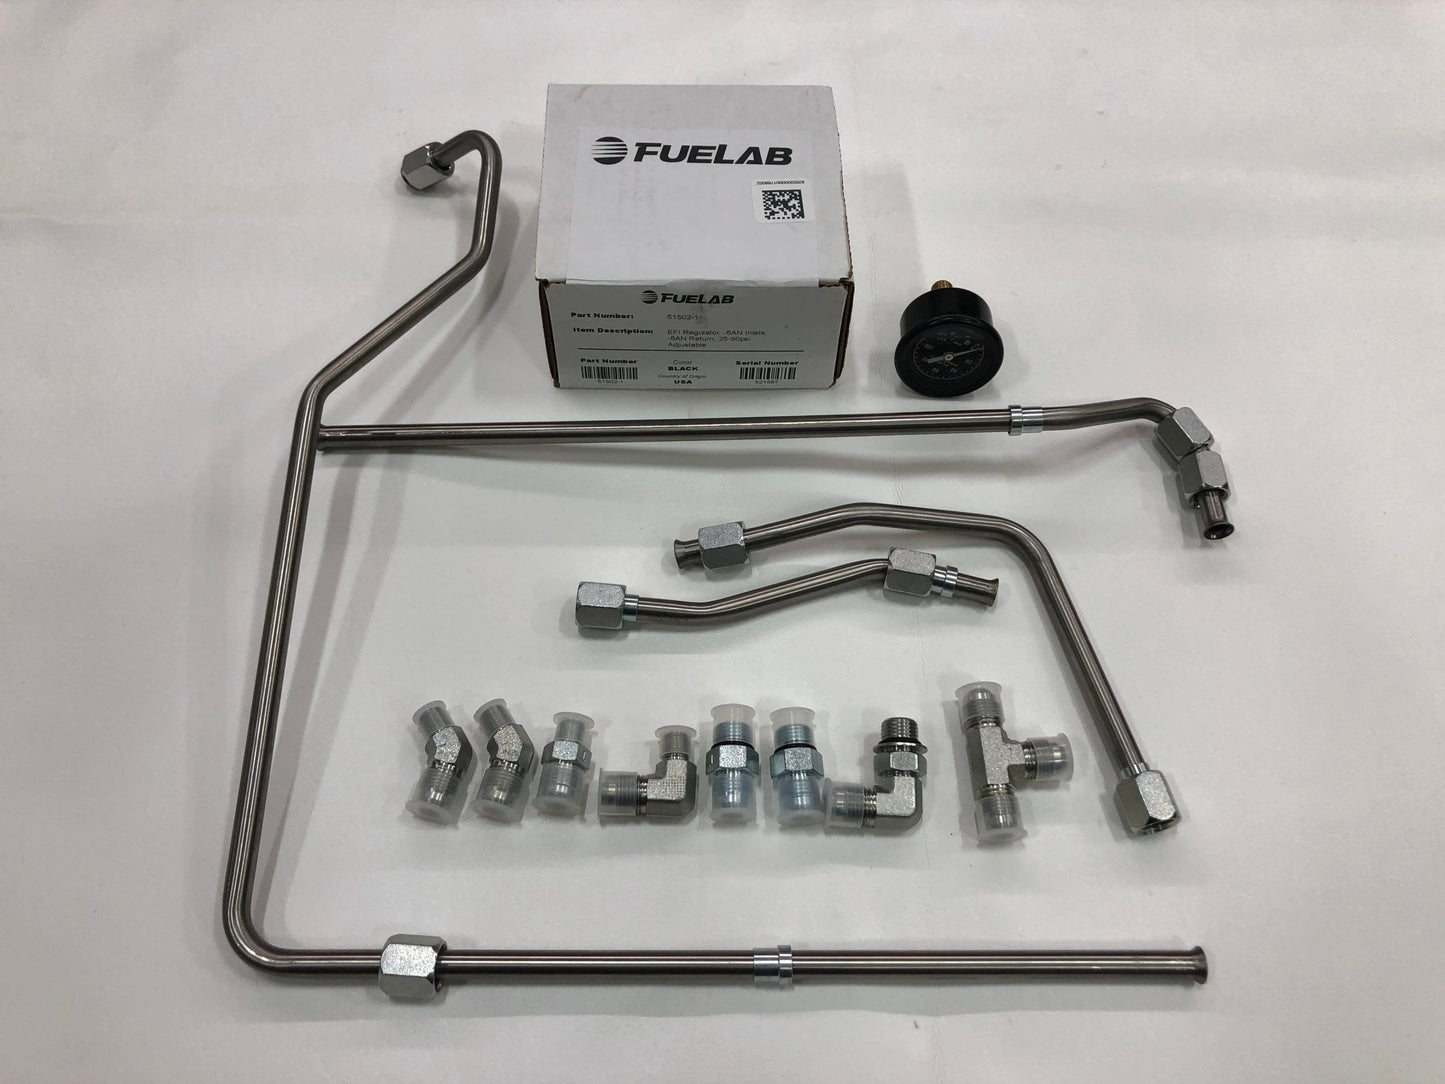 (1999-2003) - IDP Super Duty standard fuel system (Includes regulated return) NOW WITH NEW BOSCH 464-200 PUMP, BILLET FILTER AND PUMP BASE!